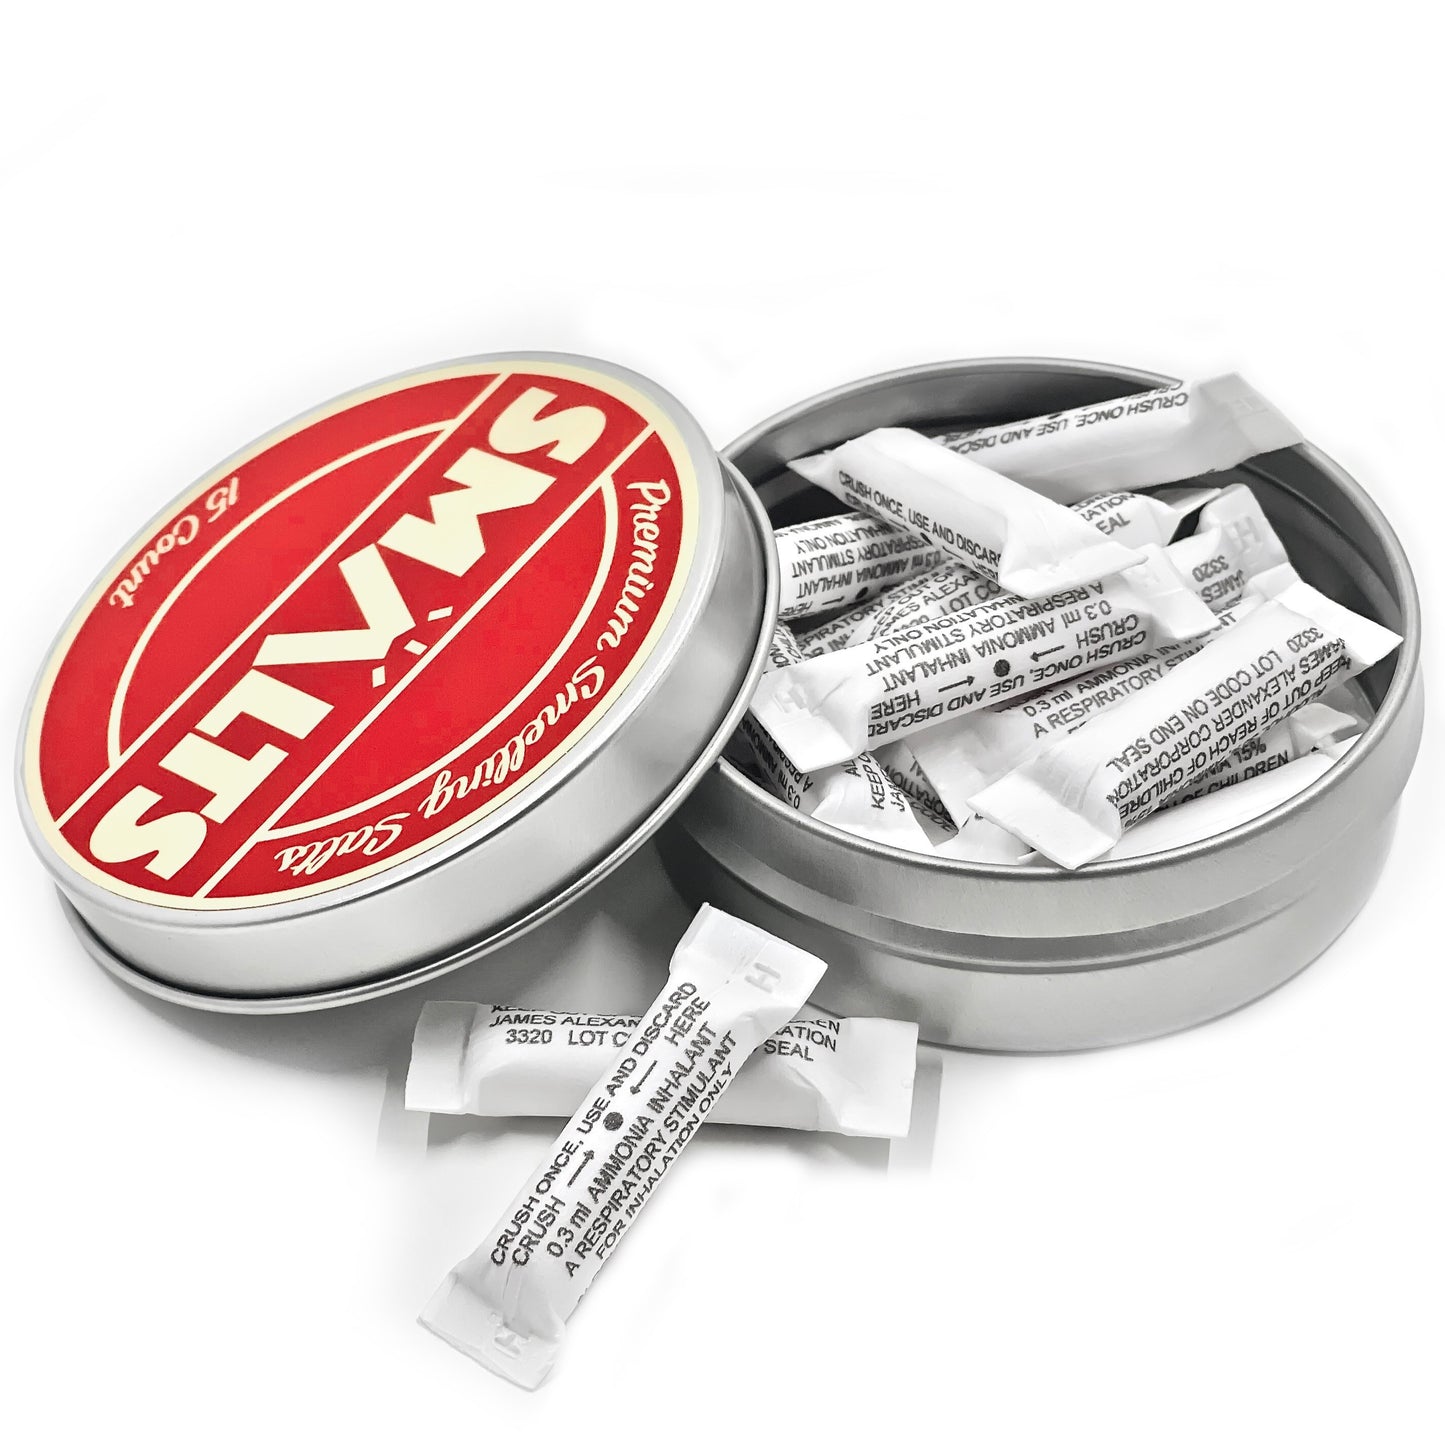 Smalts - Smelling Salts Tin (30 Count)